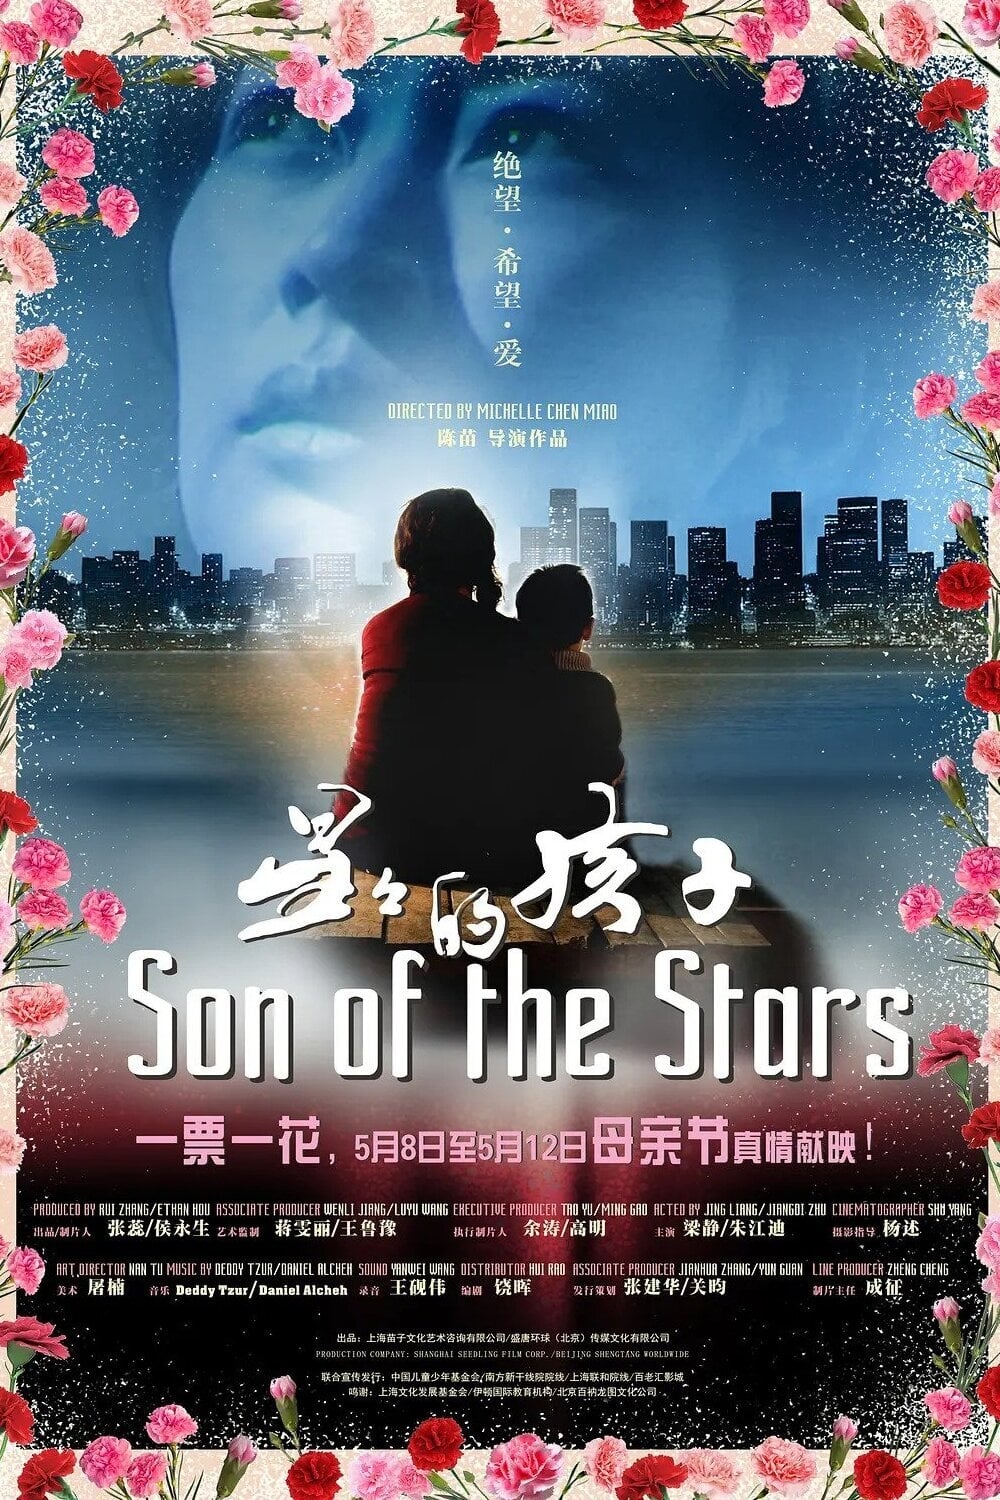 Son of the Stars